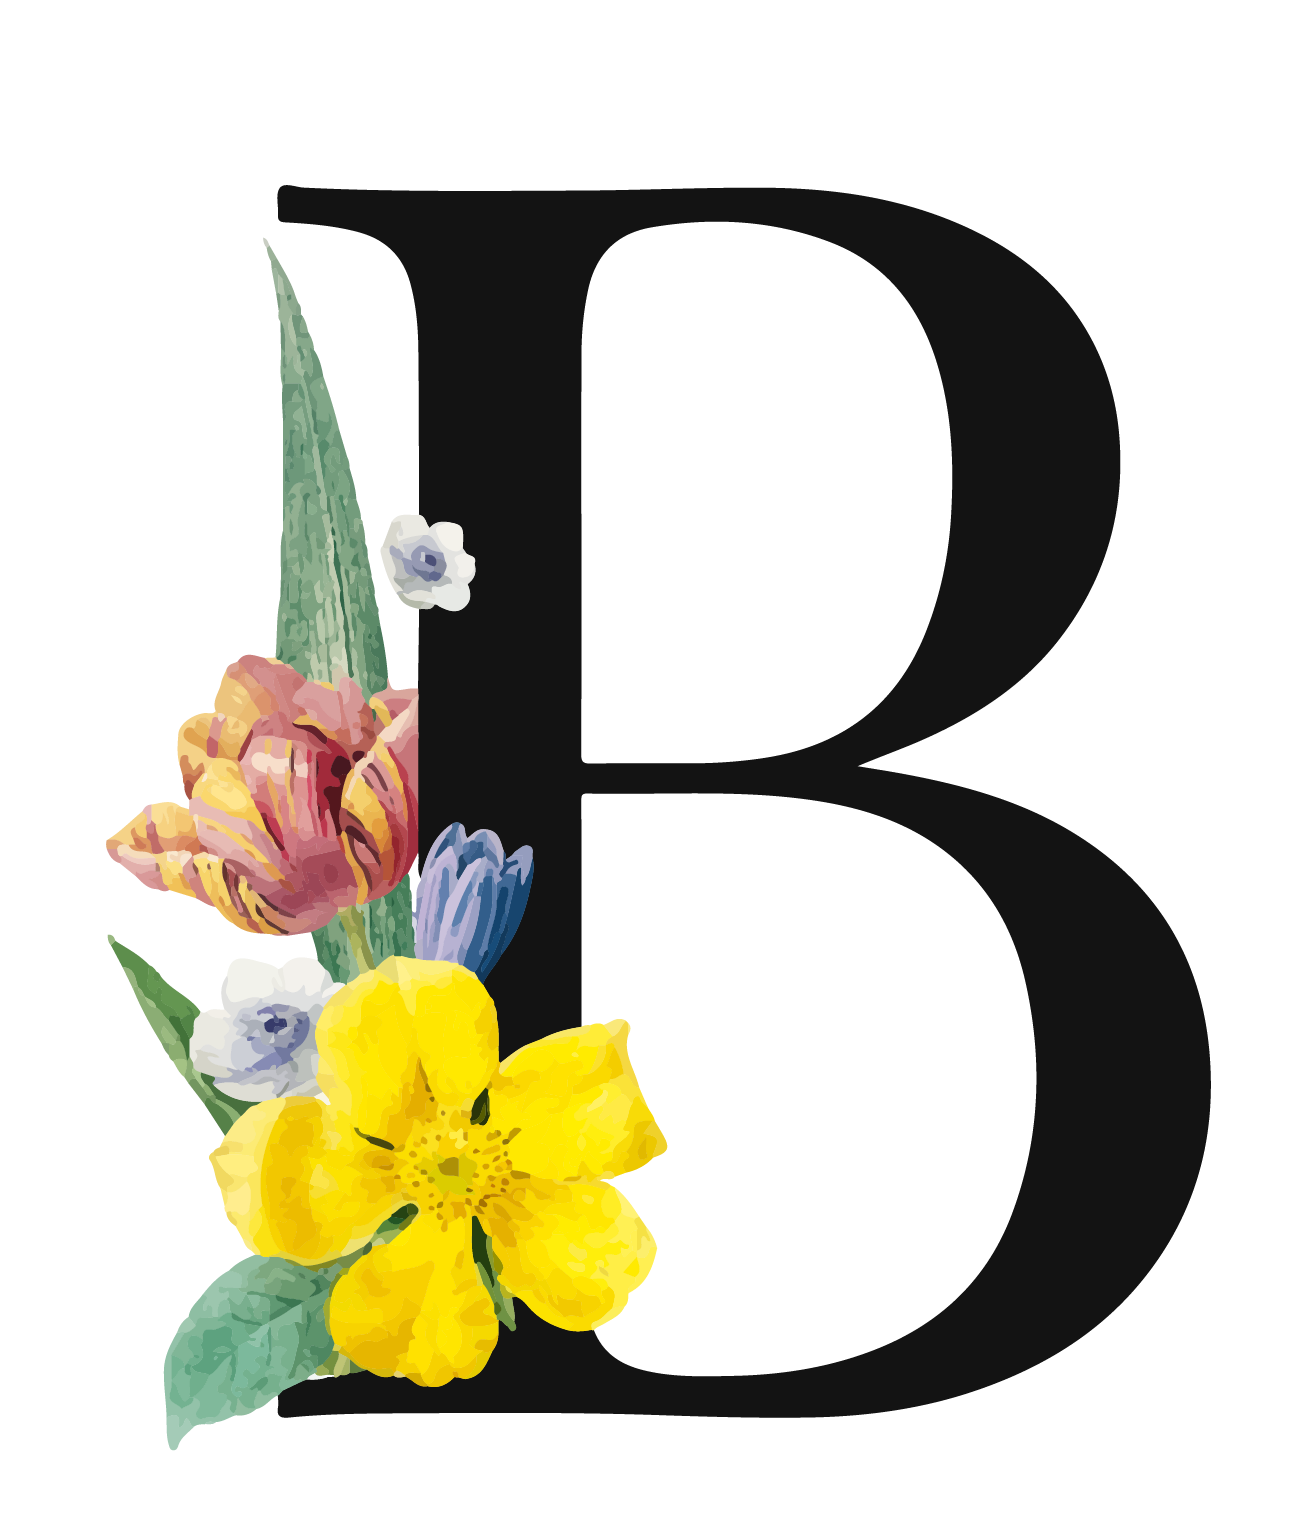 Letter B Png Royalty Free Image Png Play